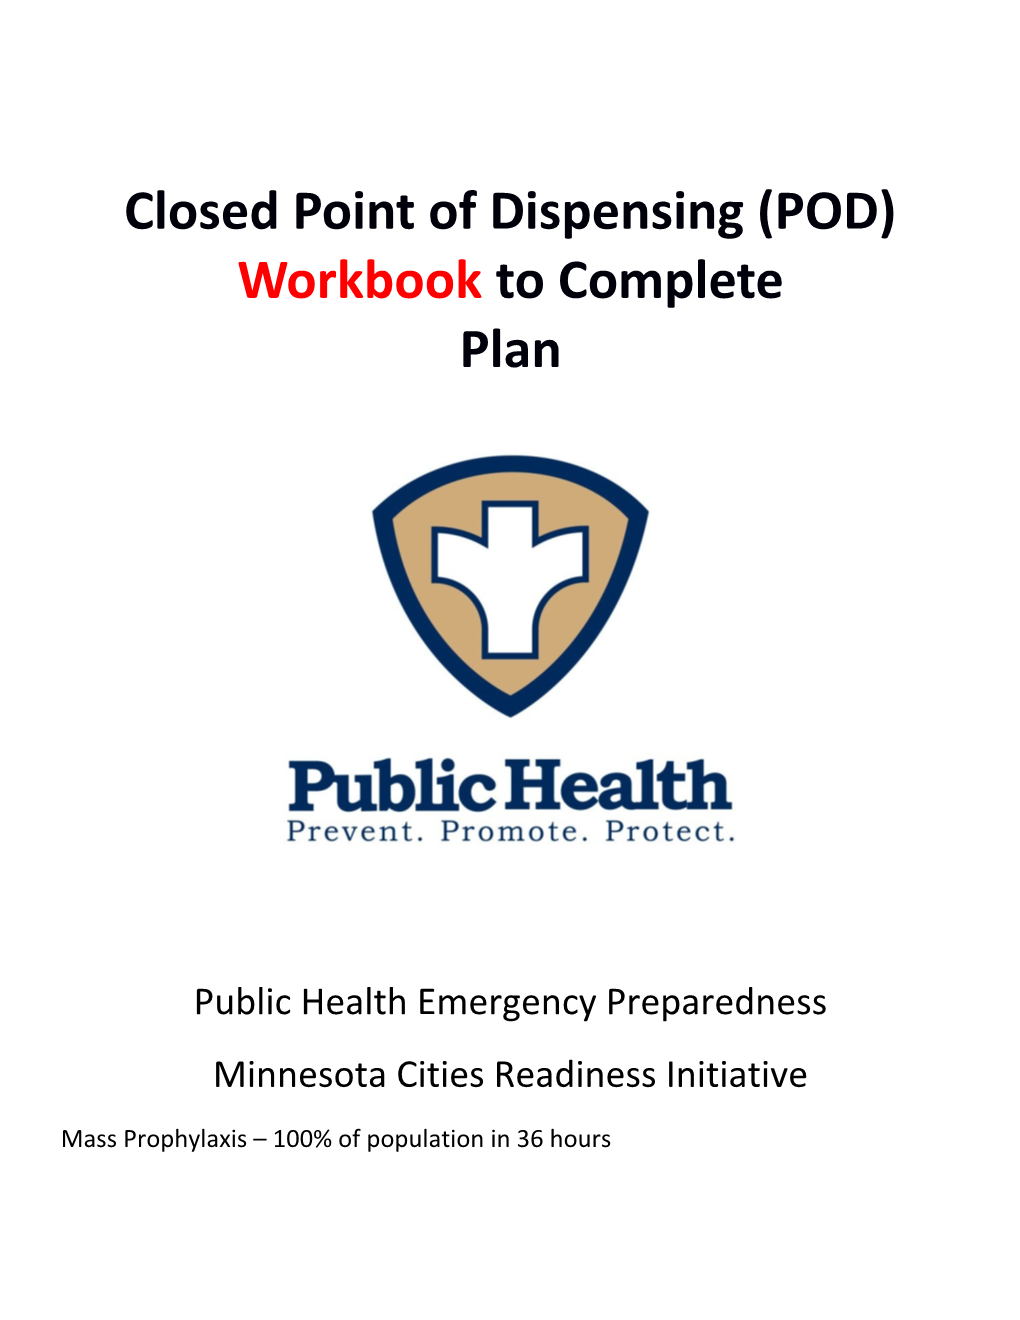 Closed Point of Dispensing (POD)Workbookto Complete